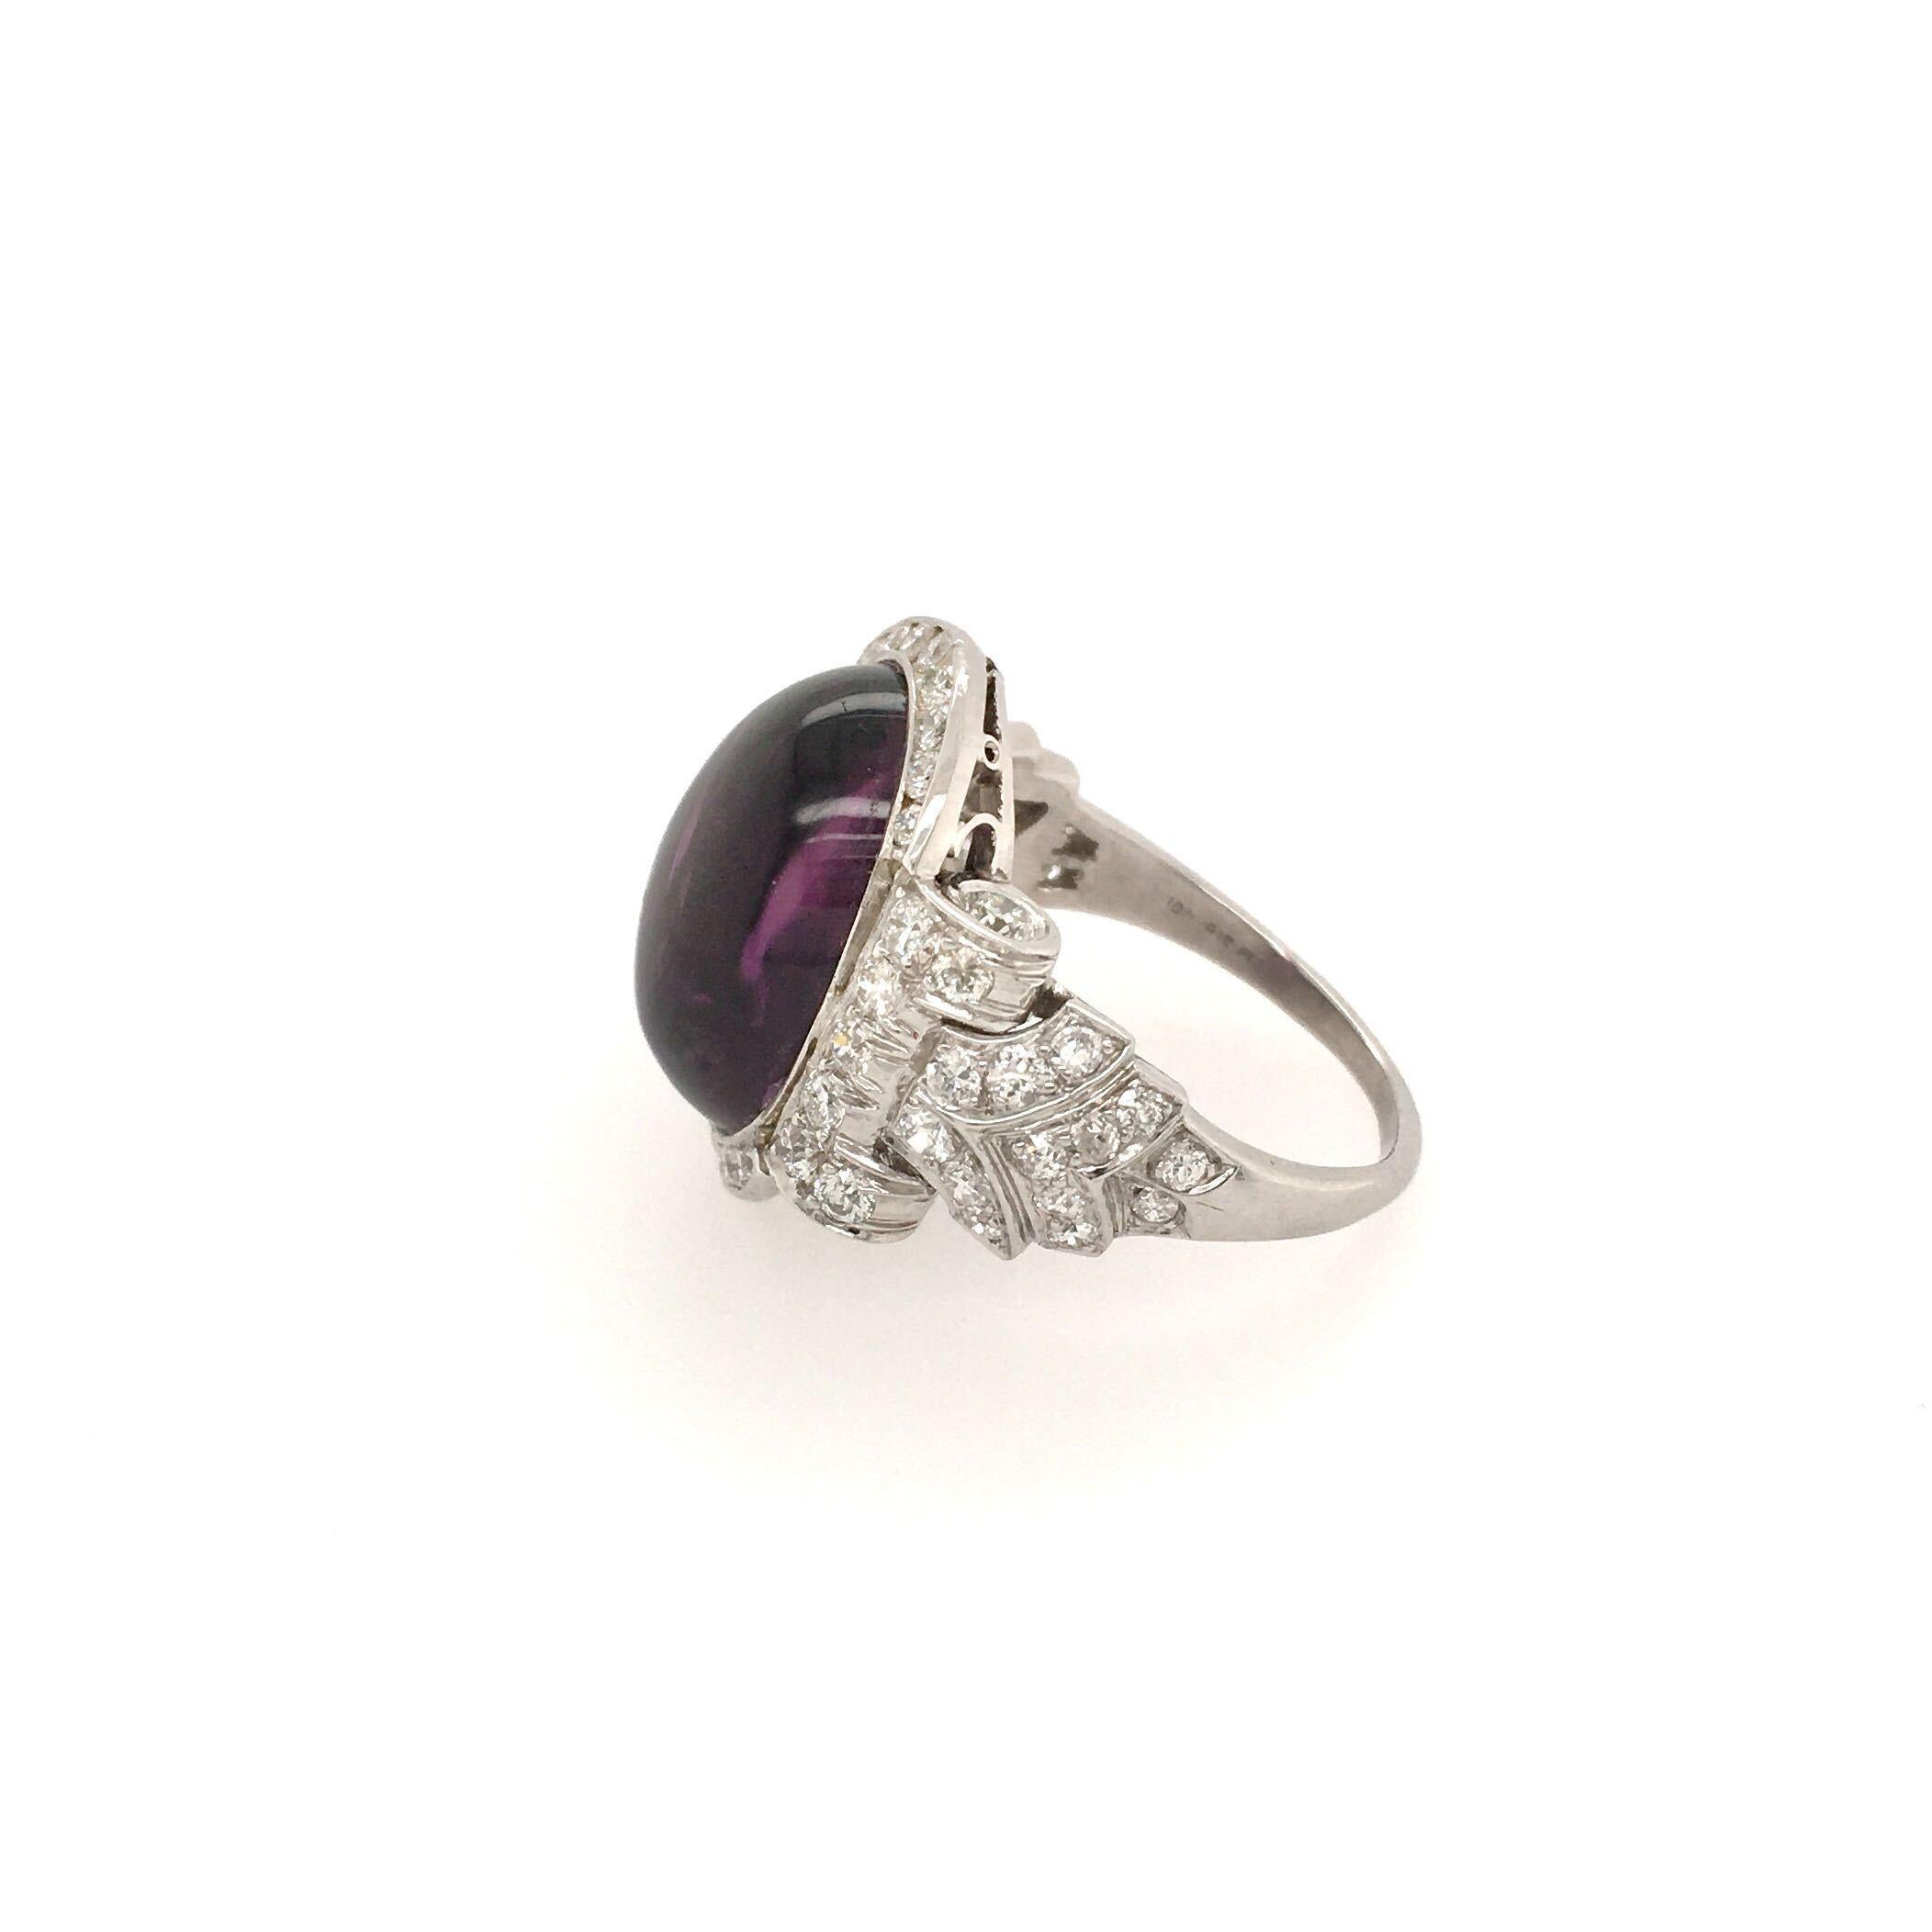 A platinum, diamond and amethyst ring. Of pave diamond scrolling design, set with a cabochon amethyst measuring approximately 16.50 x 13.0mm. Fifty six (56) diamonds weigh approximately 1.40 carat. Size 8 1/4, gross weight is approximately 9.6